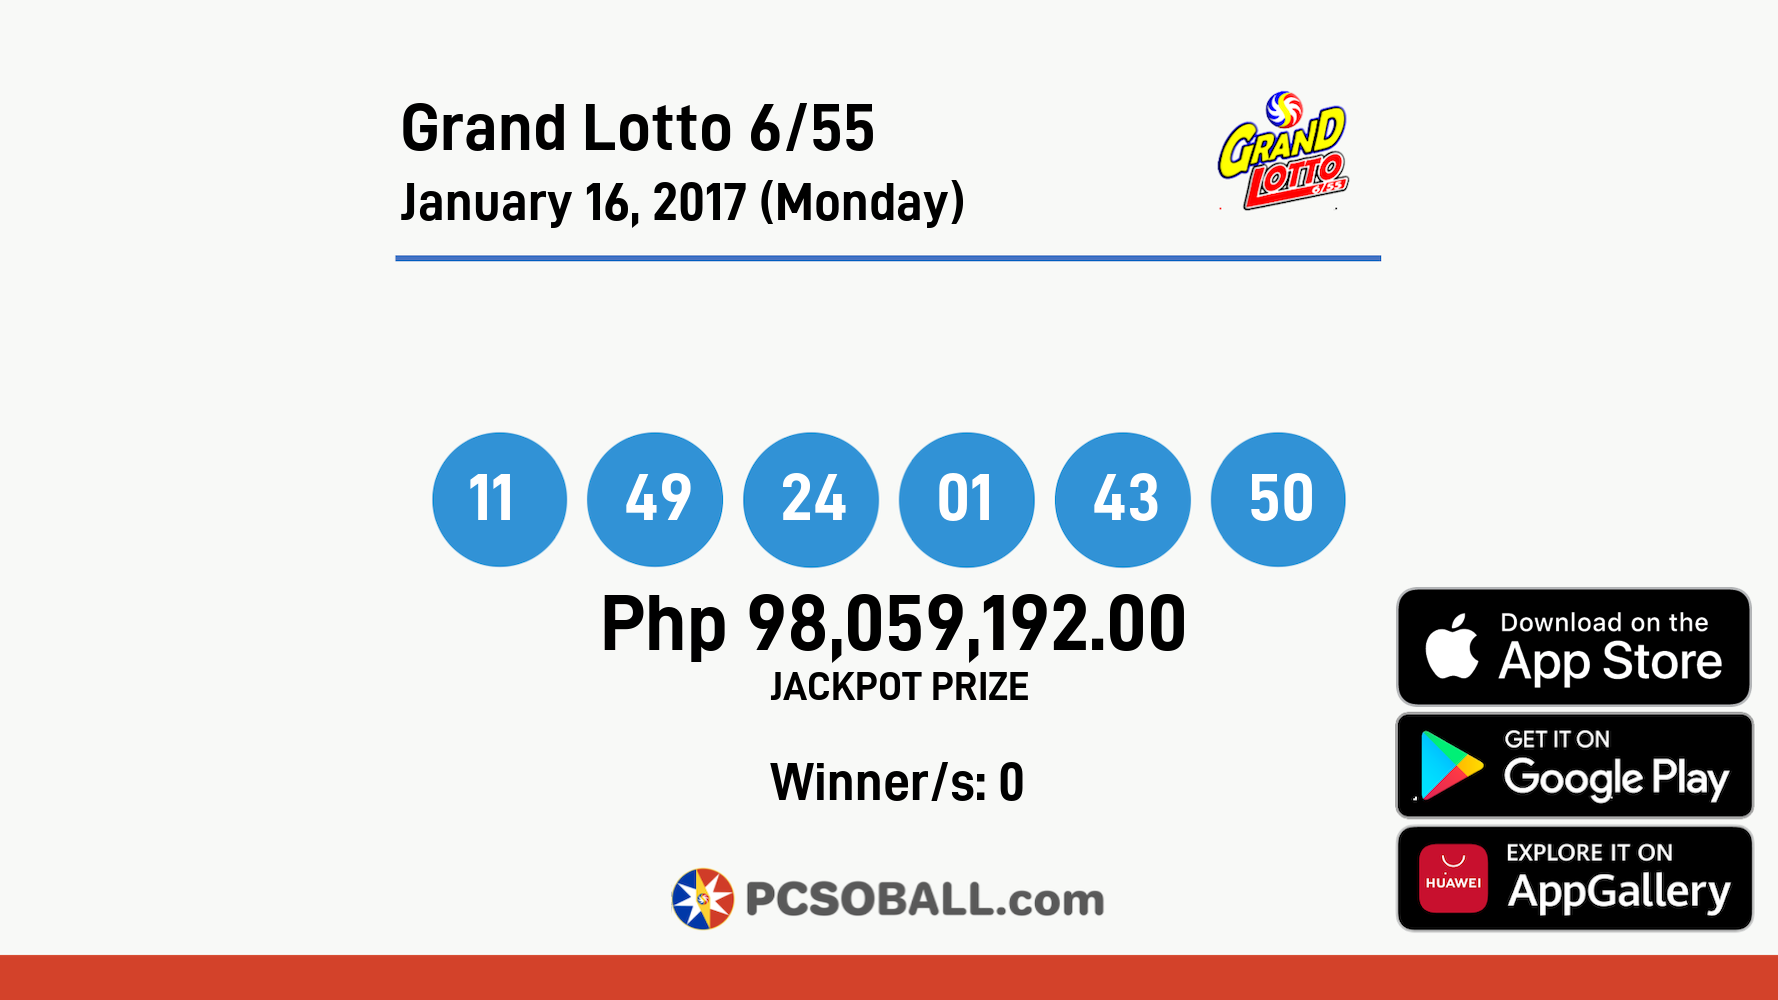 Grand Lotto 6/55 January 16, 2017 (Monday) Result